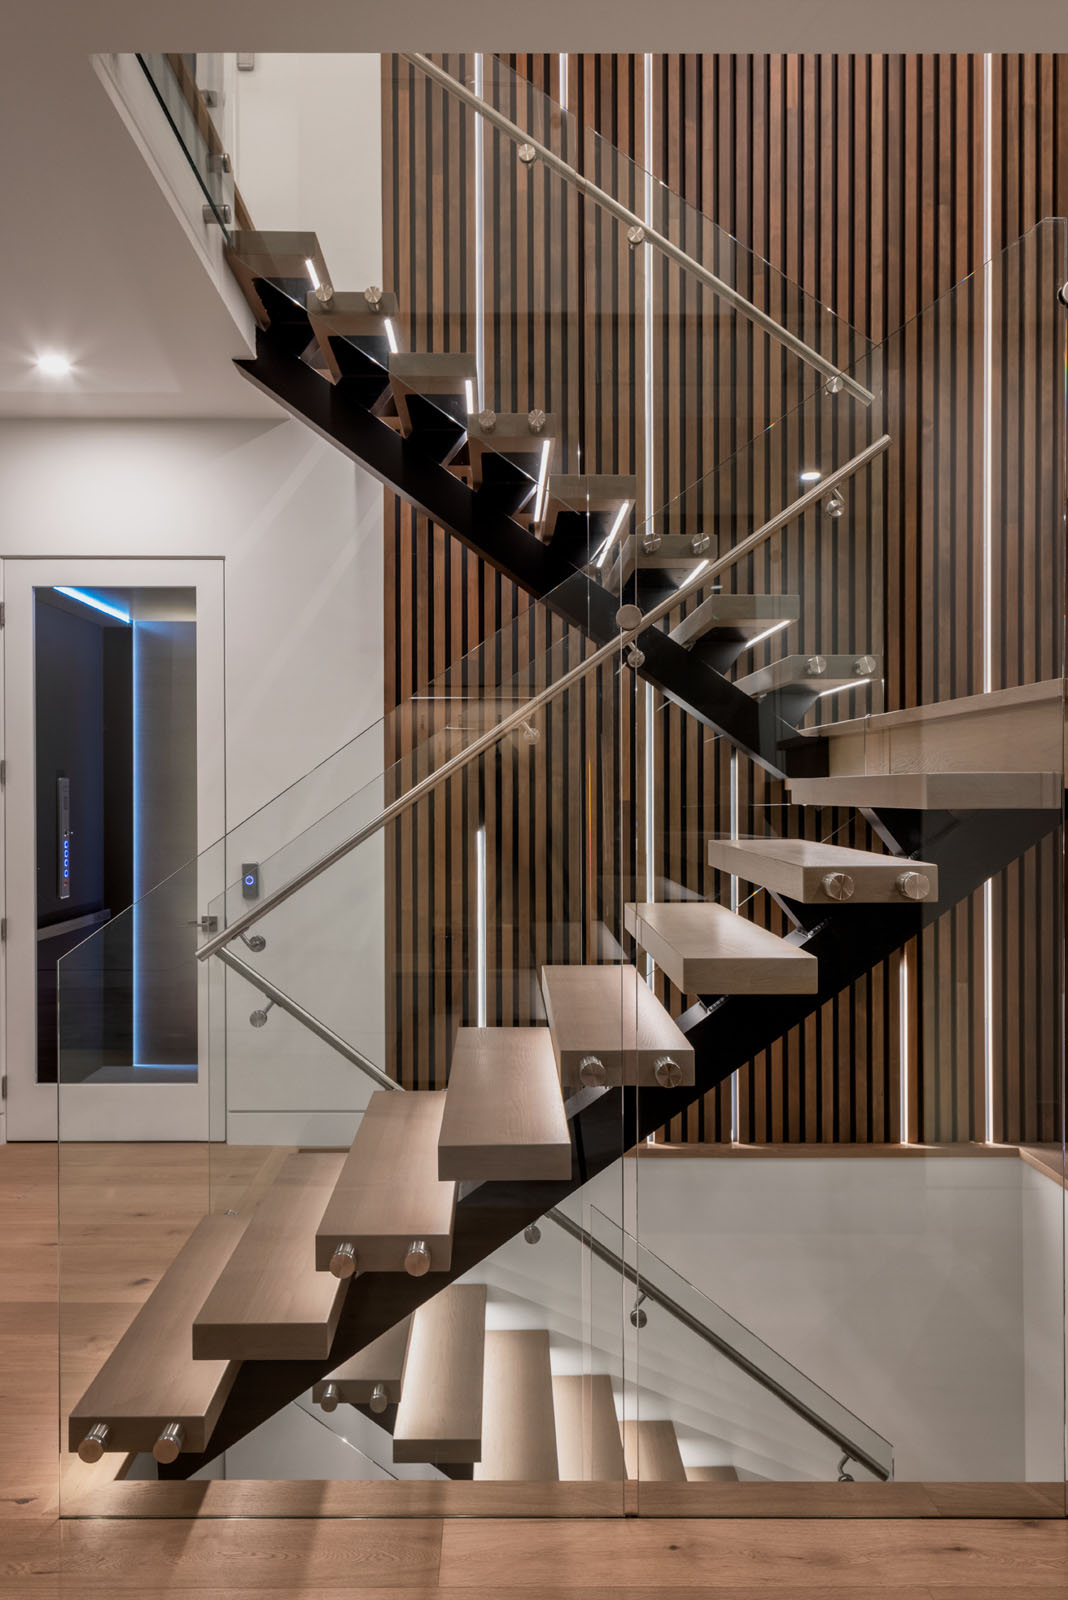 Staircase interior of residential home